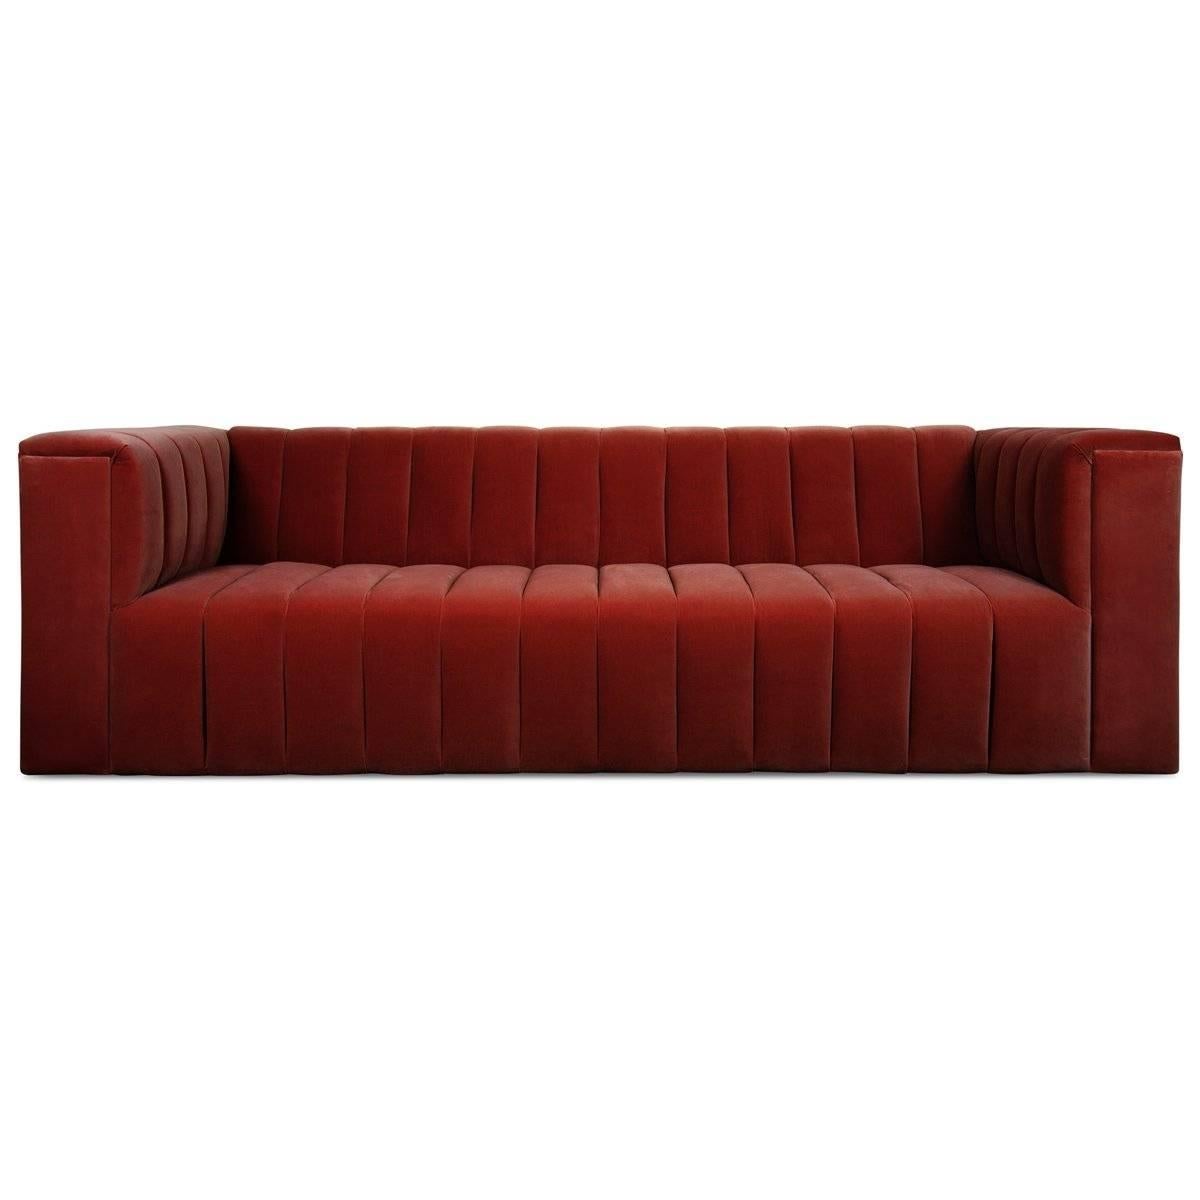 Elevate the level of comfort and style within your home with the Monaco sofa in lush velvet. Though the Merlot color and bold design lend this sofa the ability to stand alone, none can deny the brilliance and style it will add to any room. Features